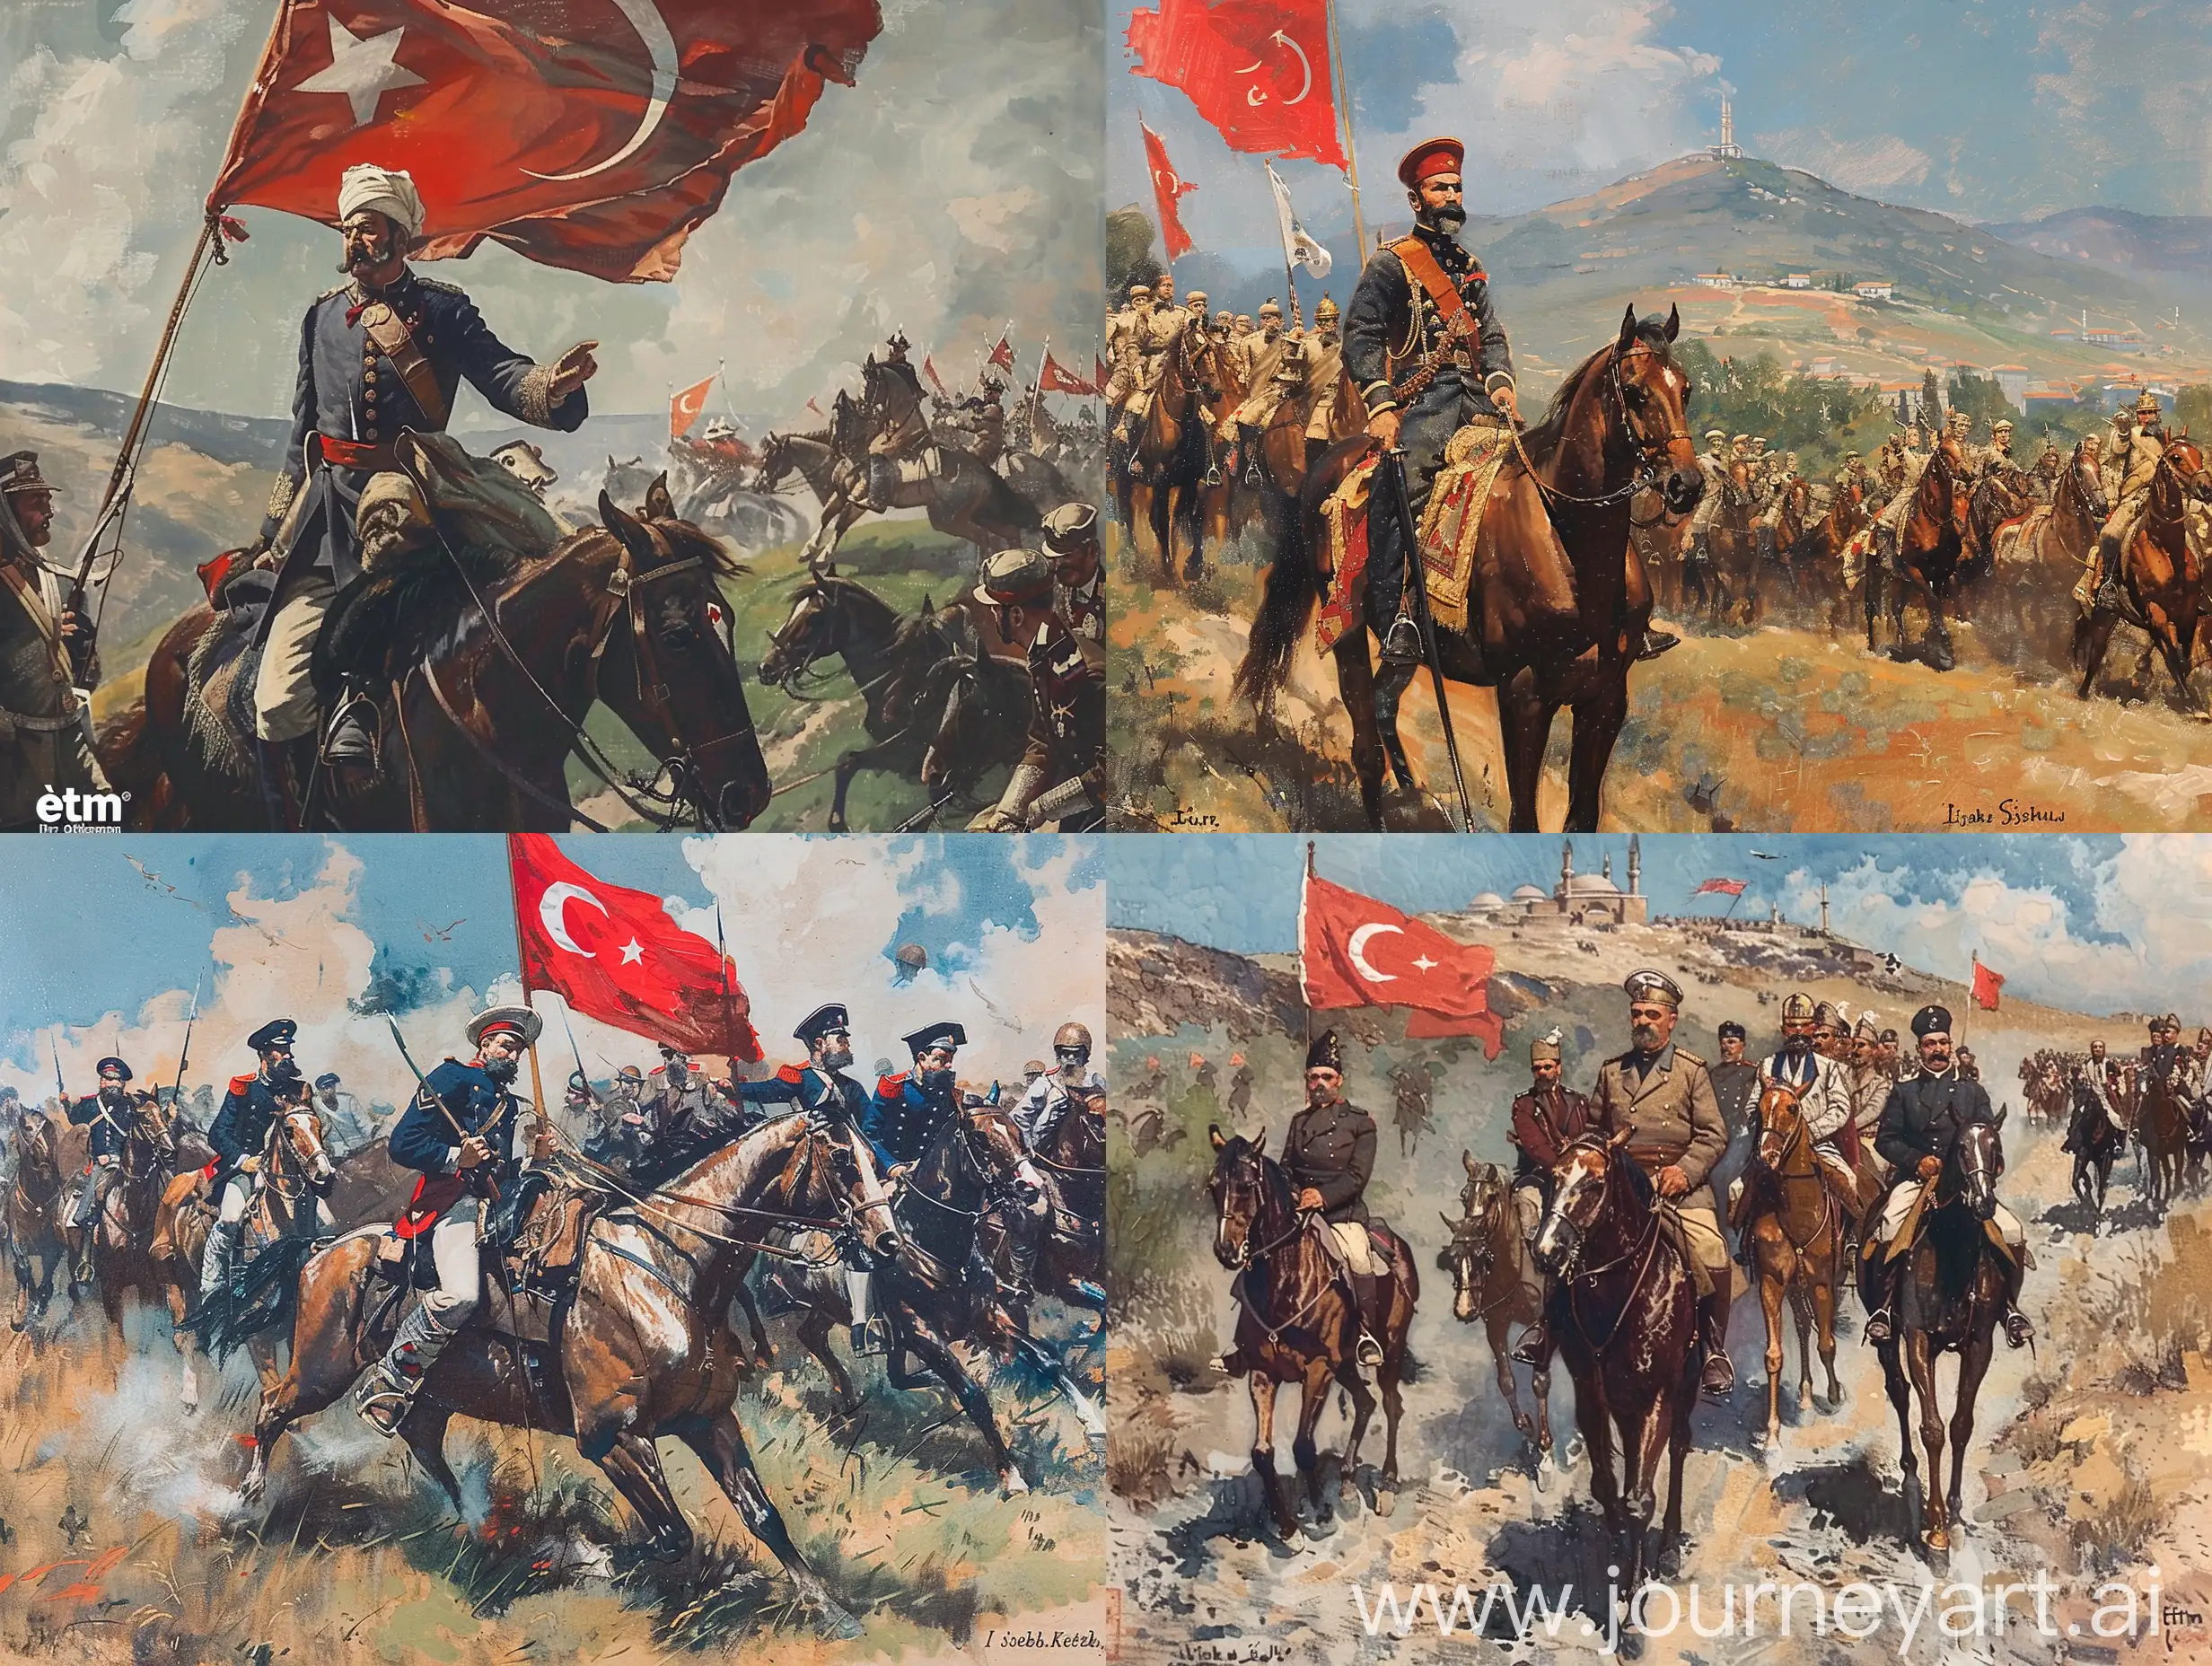 Although Mustafa Kemal had a positive view of Ethem, Ismet Pasha did not like him, and so he was not taken seriously, and the newly reconstituted Turkish Army had to put down the situation whilst also fighting the Greeks at First Battle of İnönü.